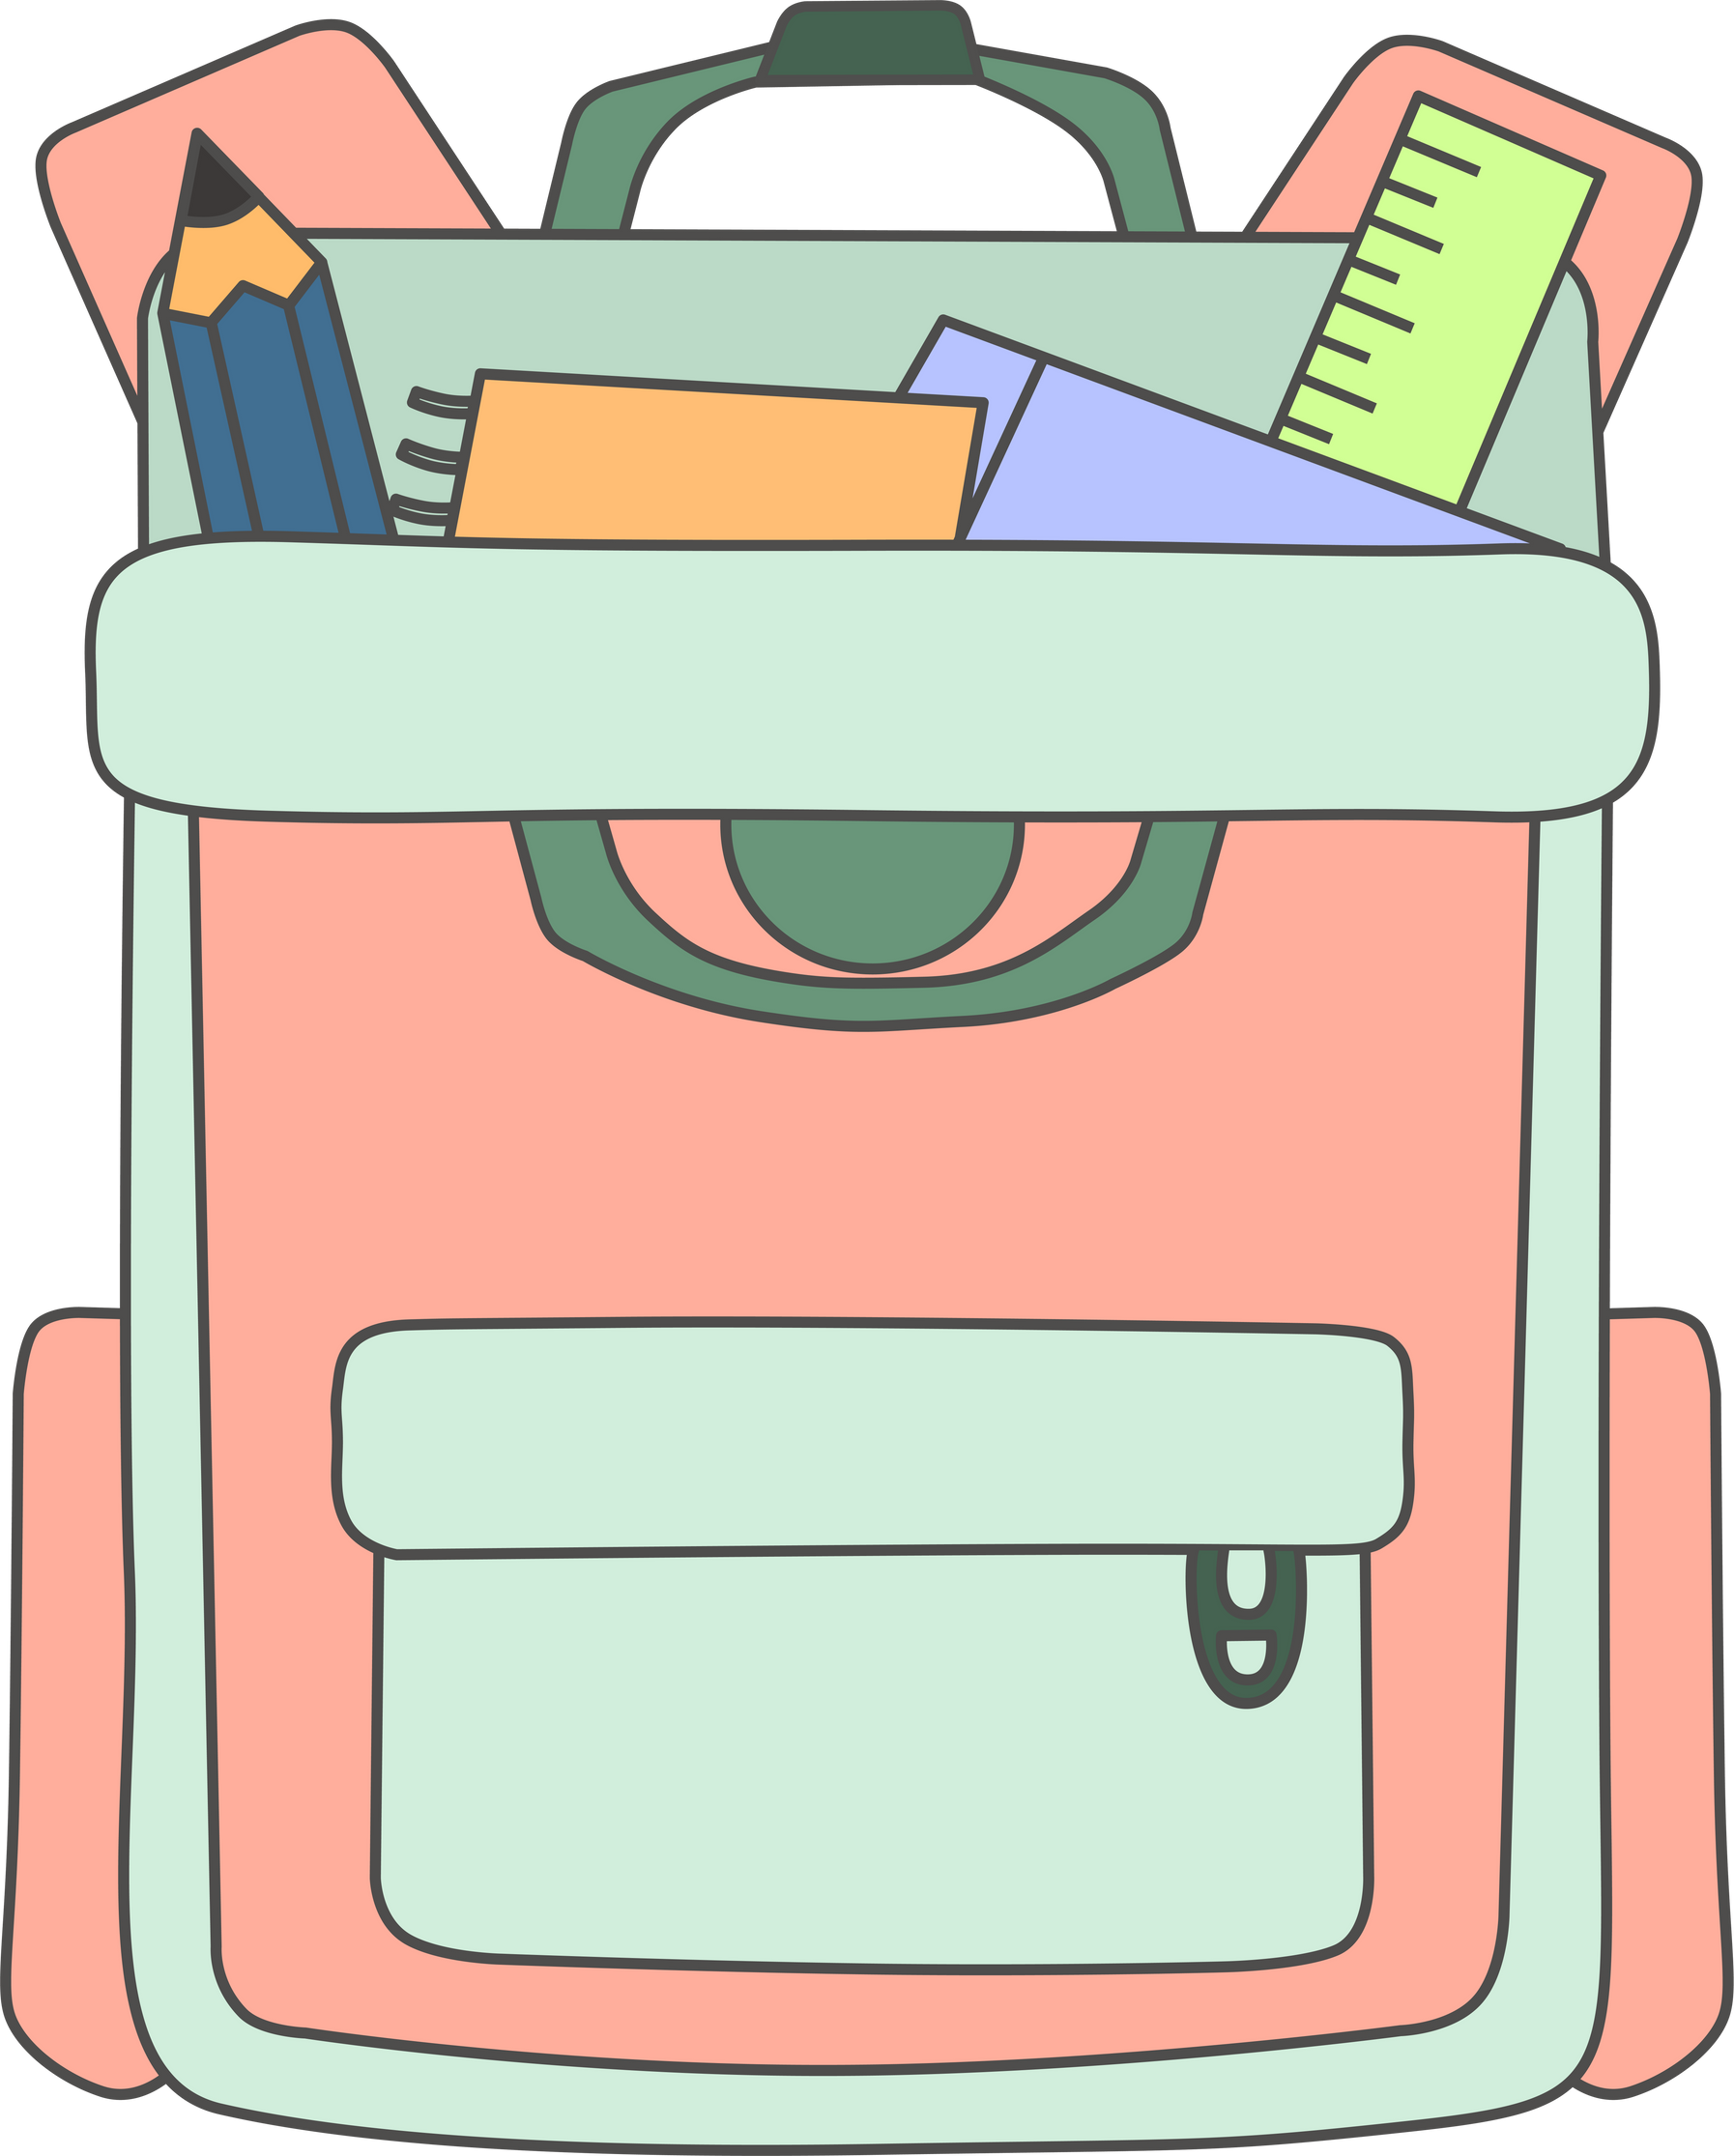 Bag with School Supplies or Stationery Illustration